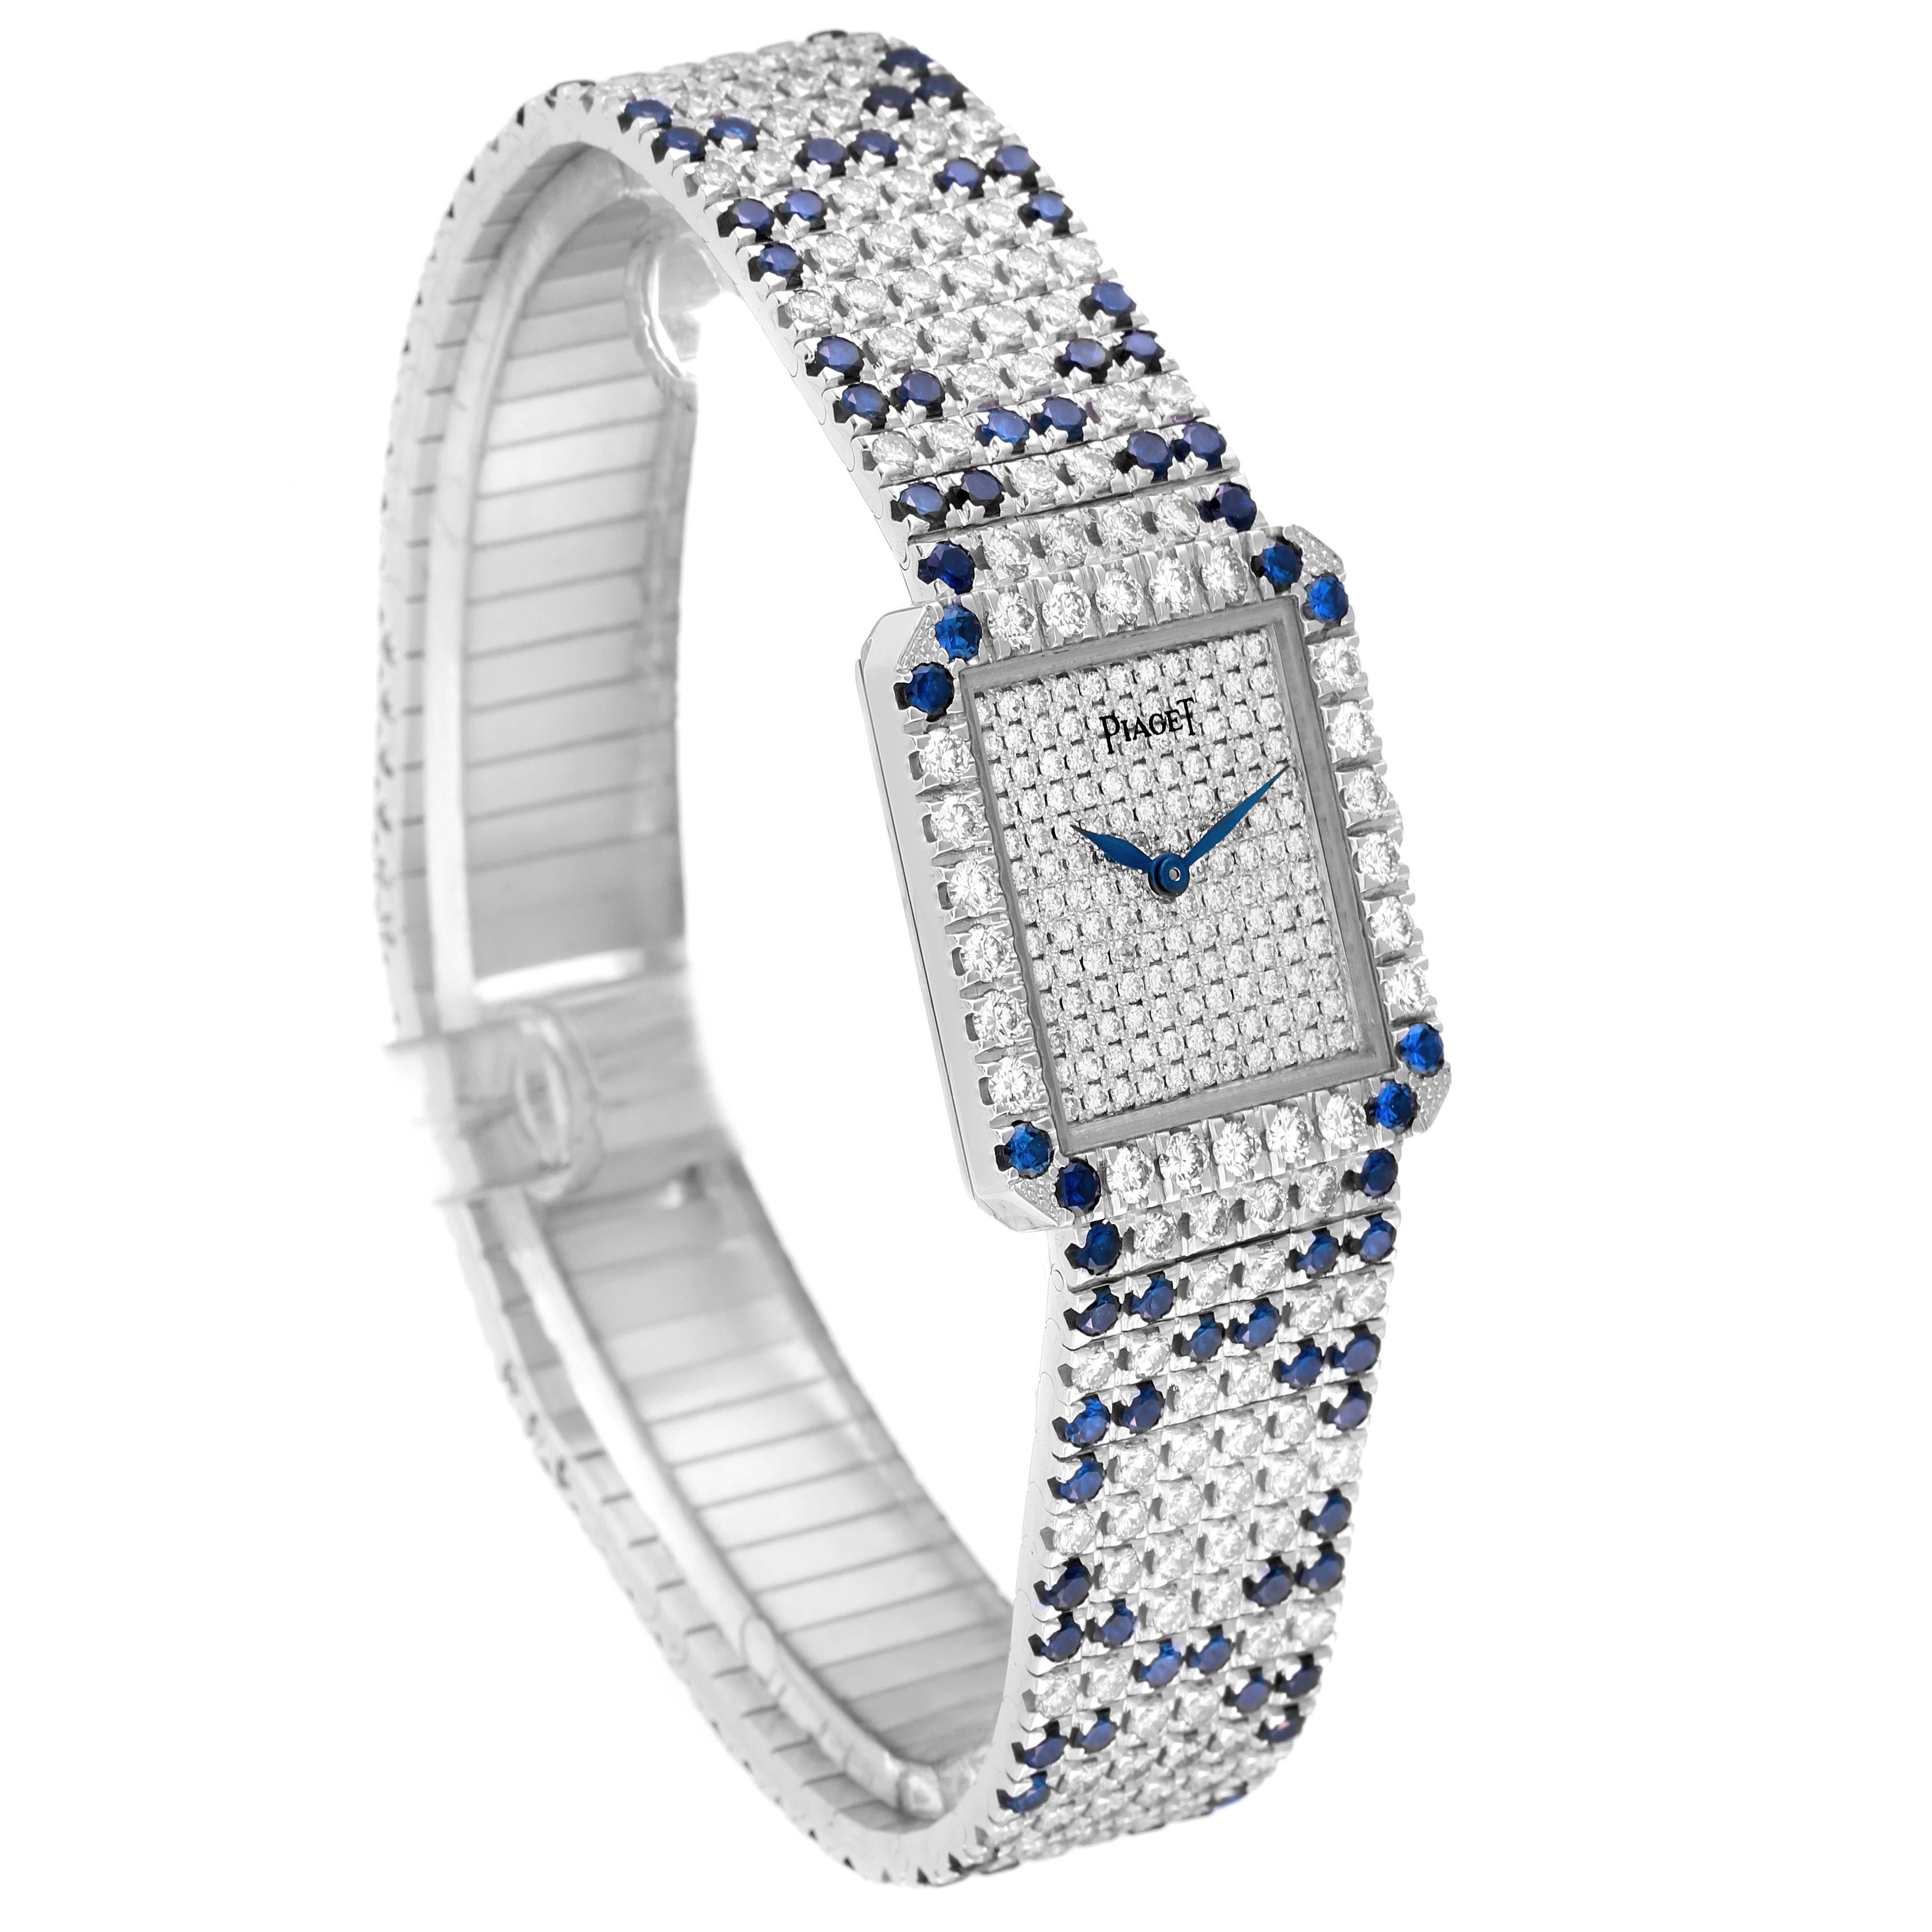 Piaget Protocole Exceptional White Gold Pave Diamond Sapphire Ladies Watch 83541 In Excellent Condition For Sale In Atlanta, GA